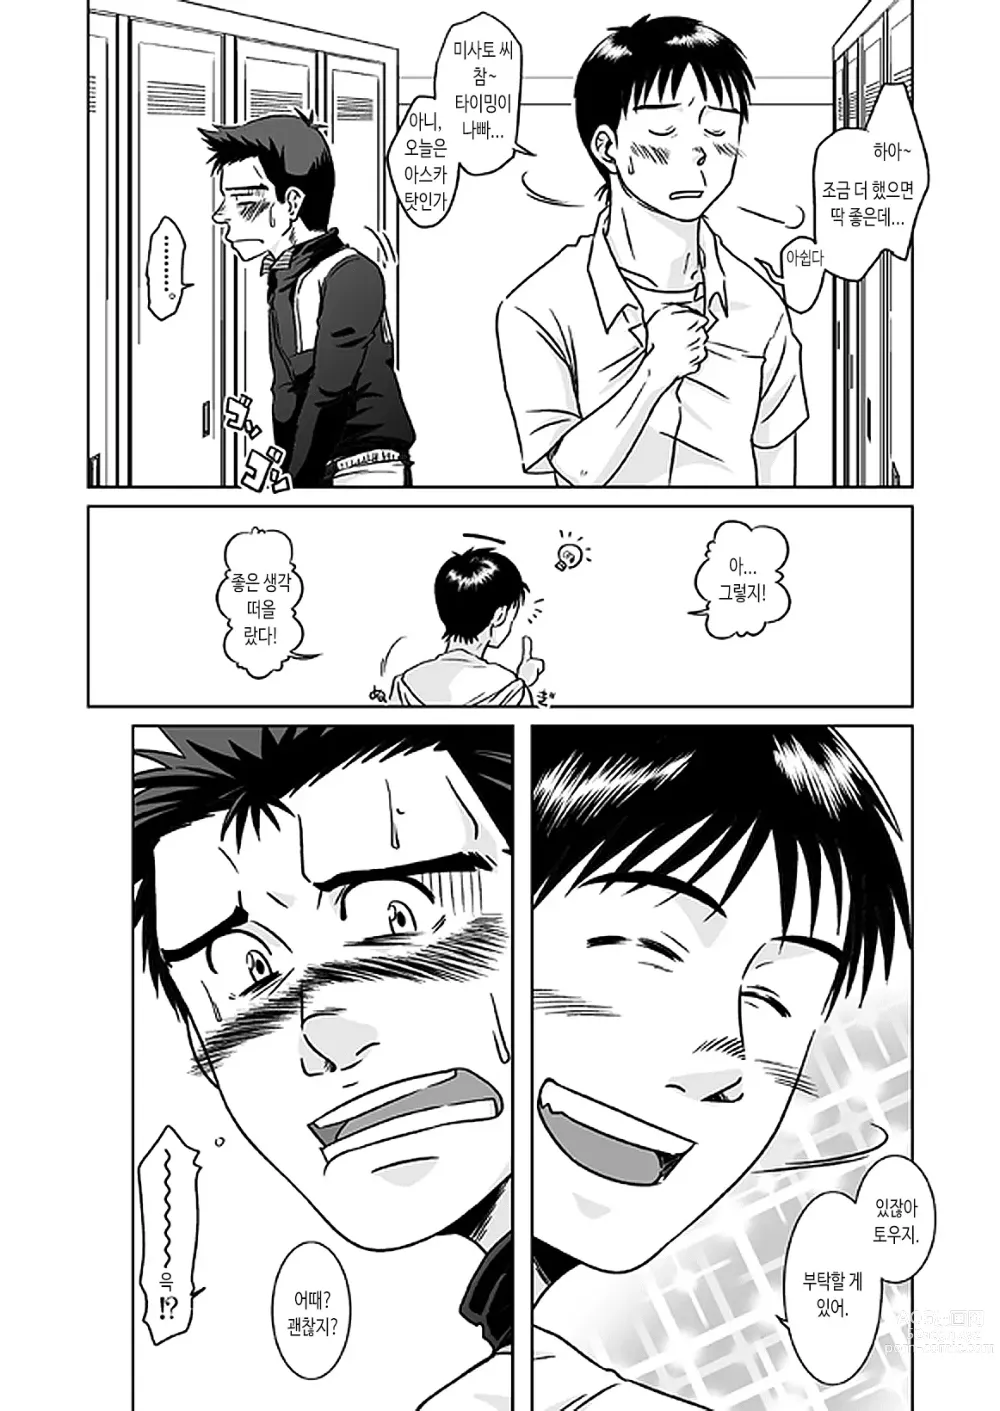 Page 9 of doujinshi 스즈하라 능욕